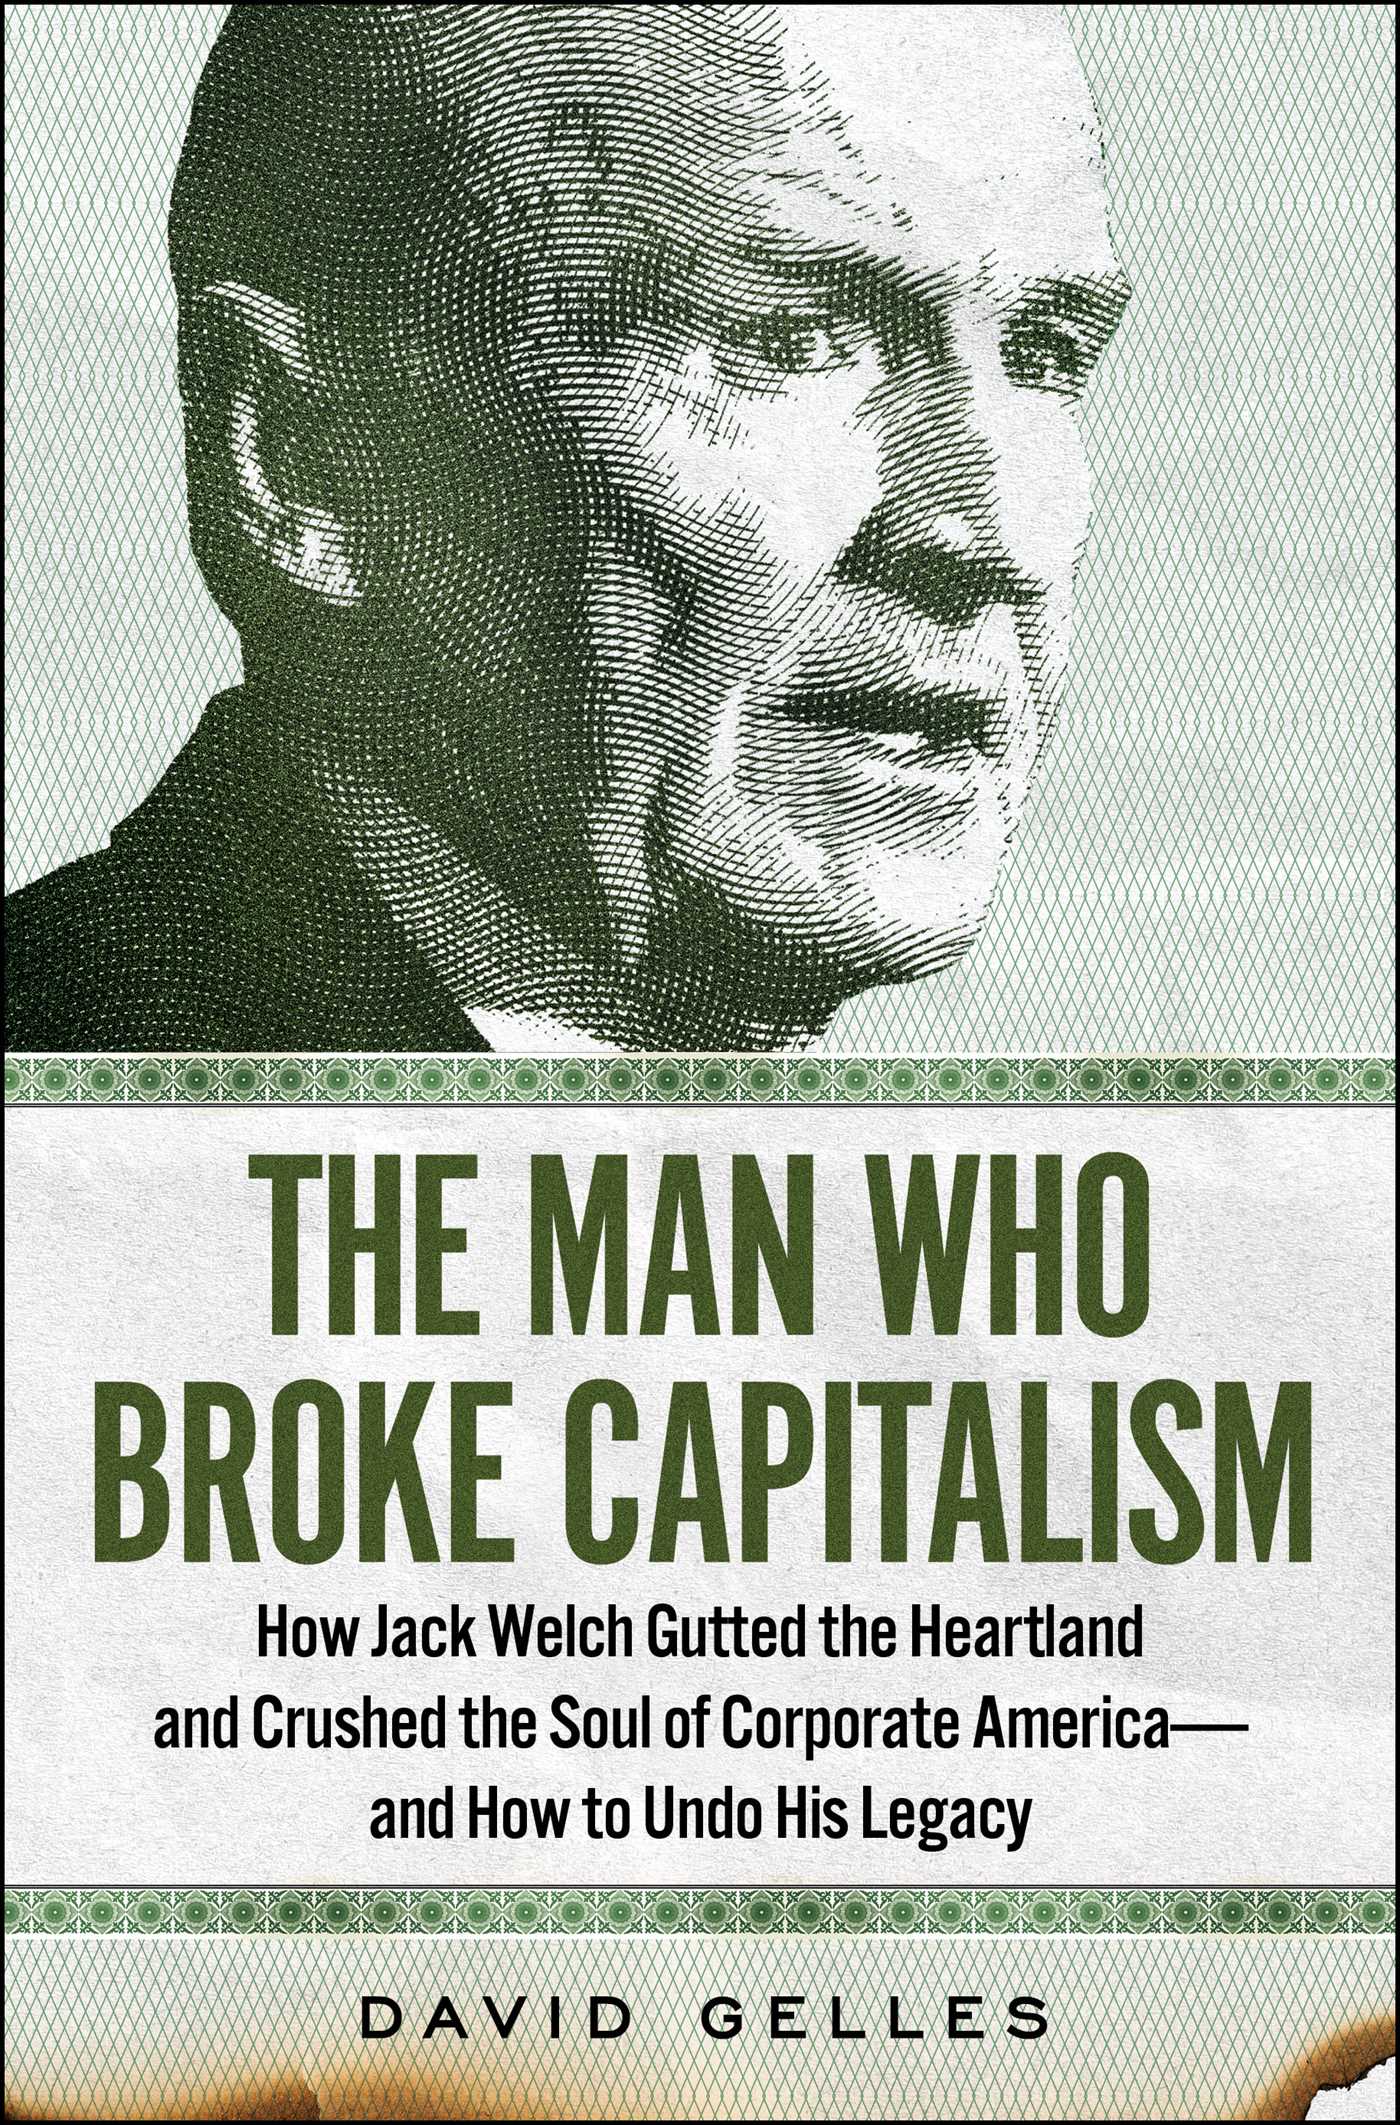 Image for "The Man Who Broke Capitalism"